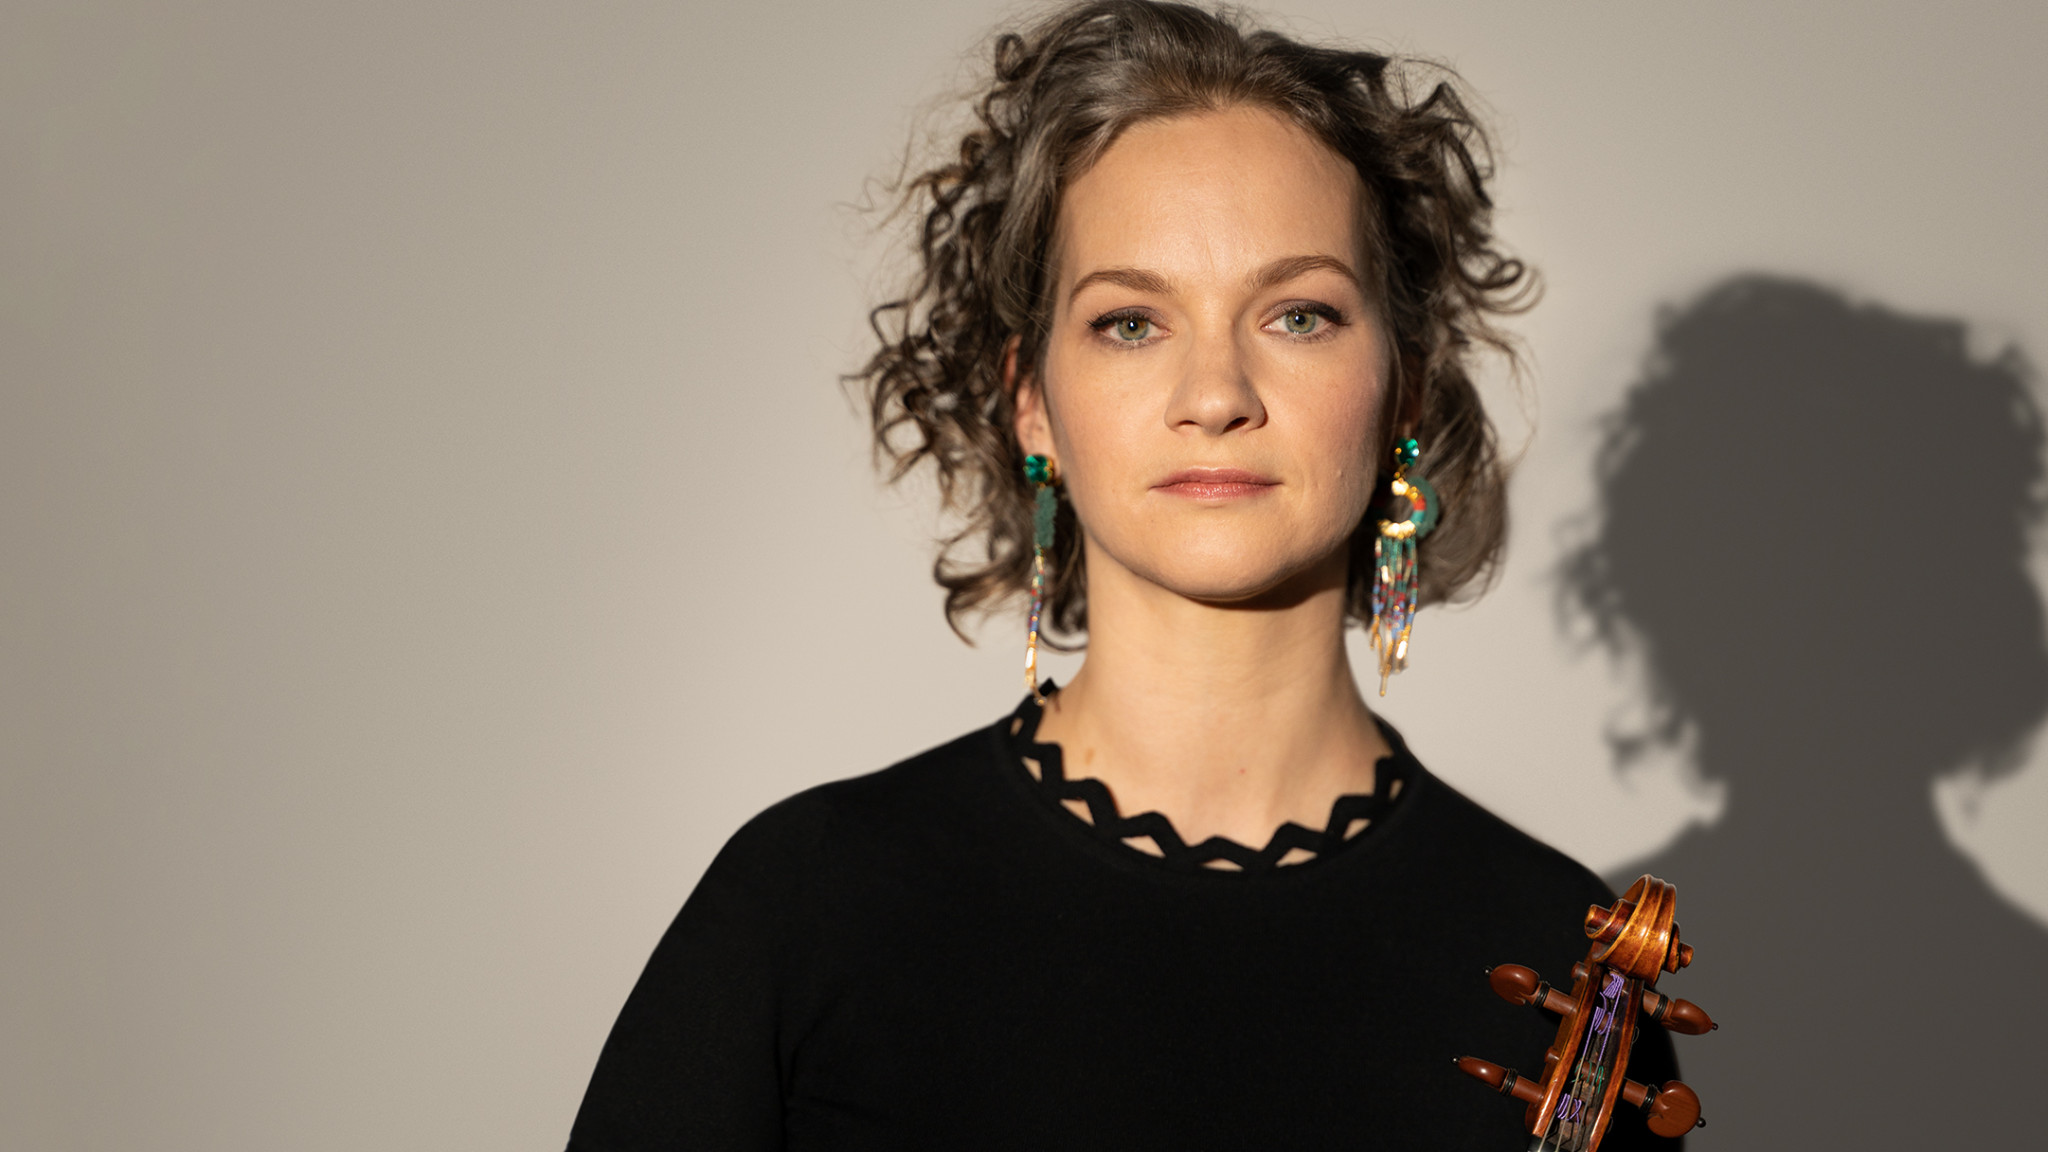 Hilary Hahn Returns to the Spotlight with ‘Eclipse'